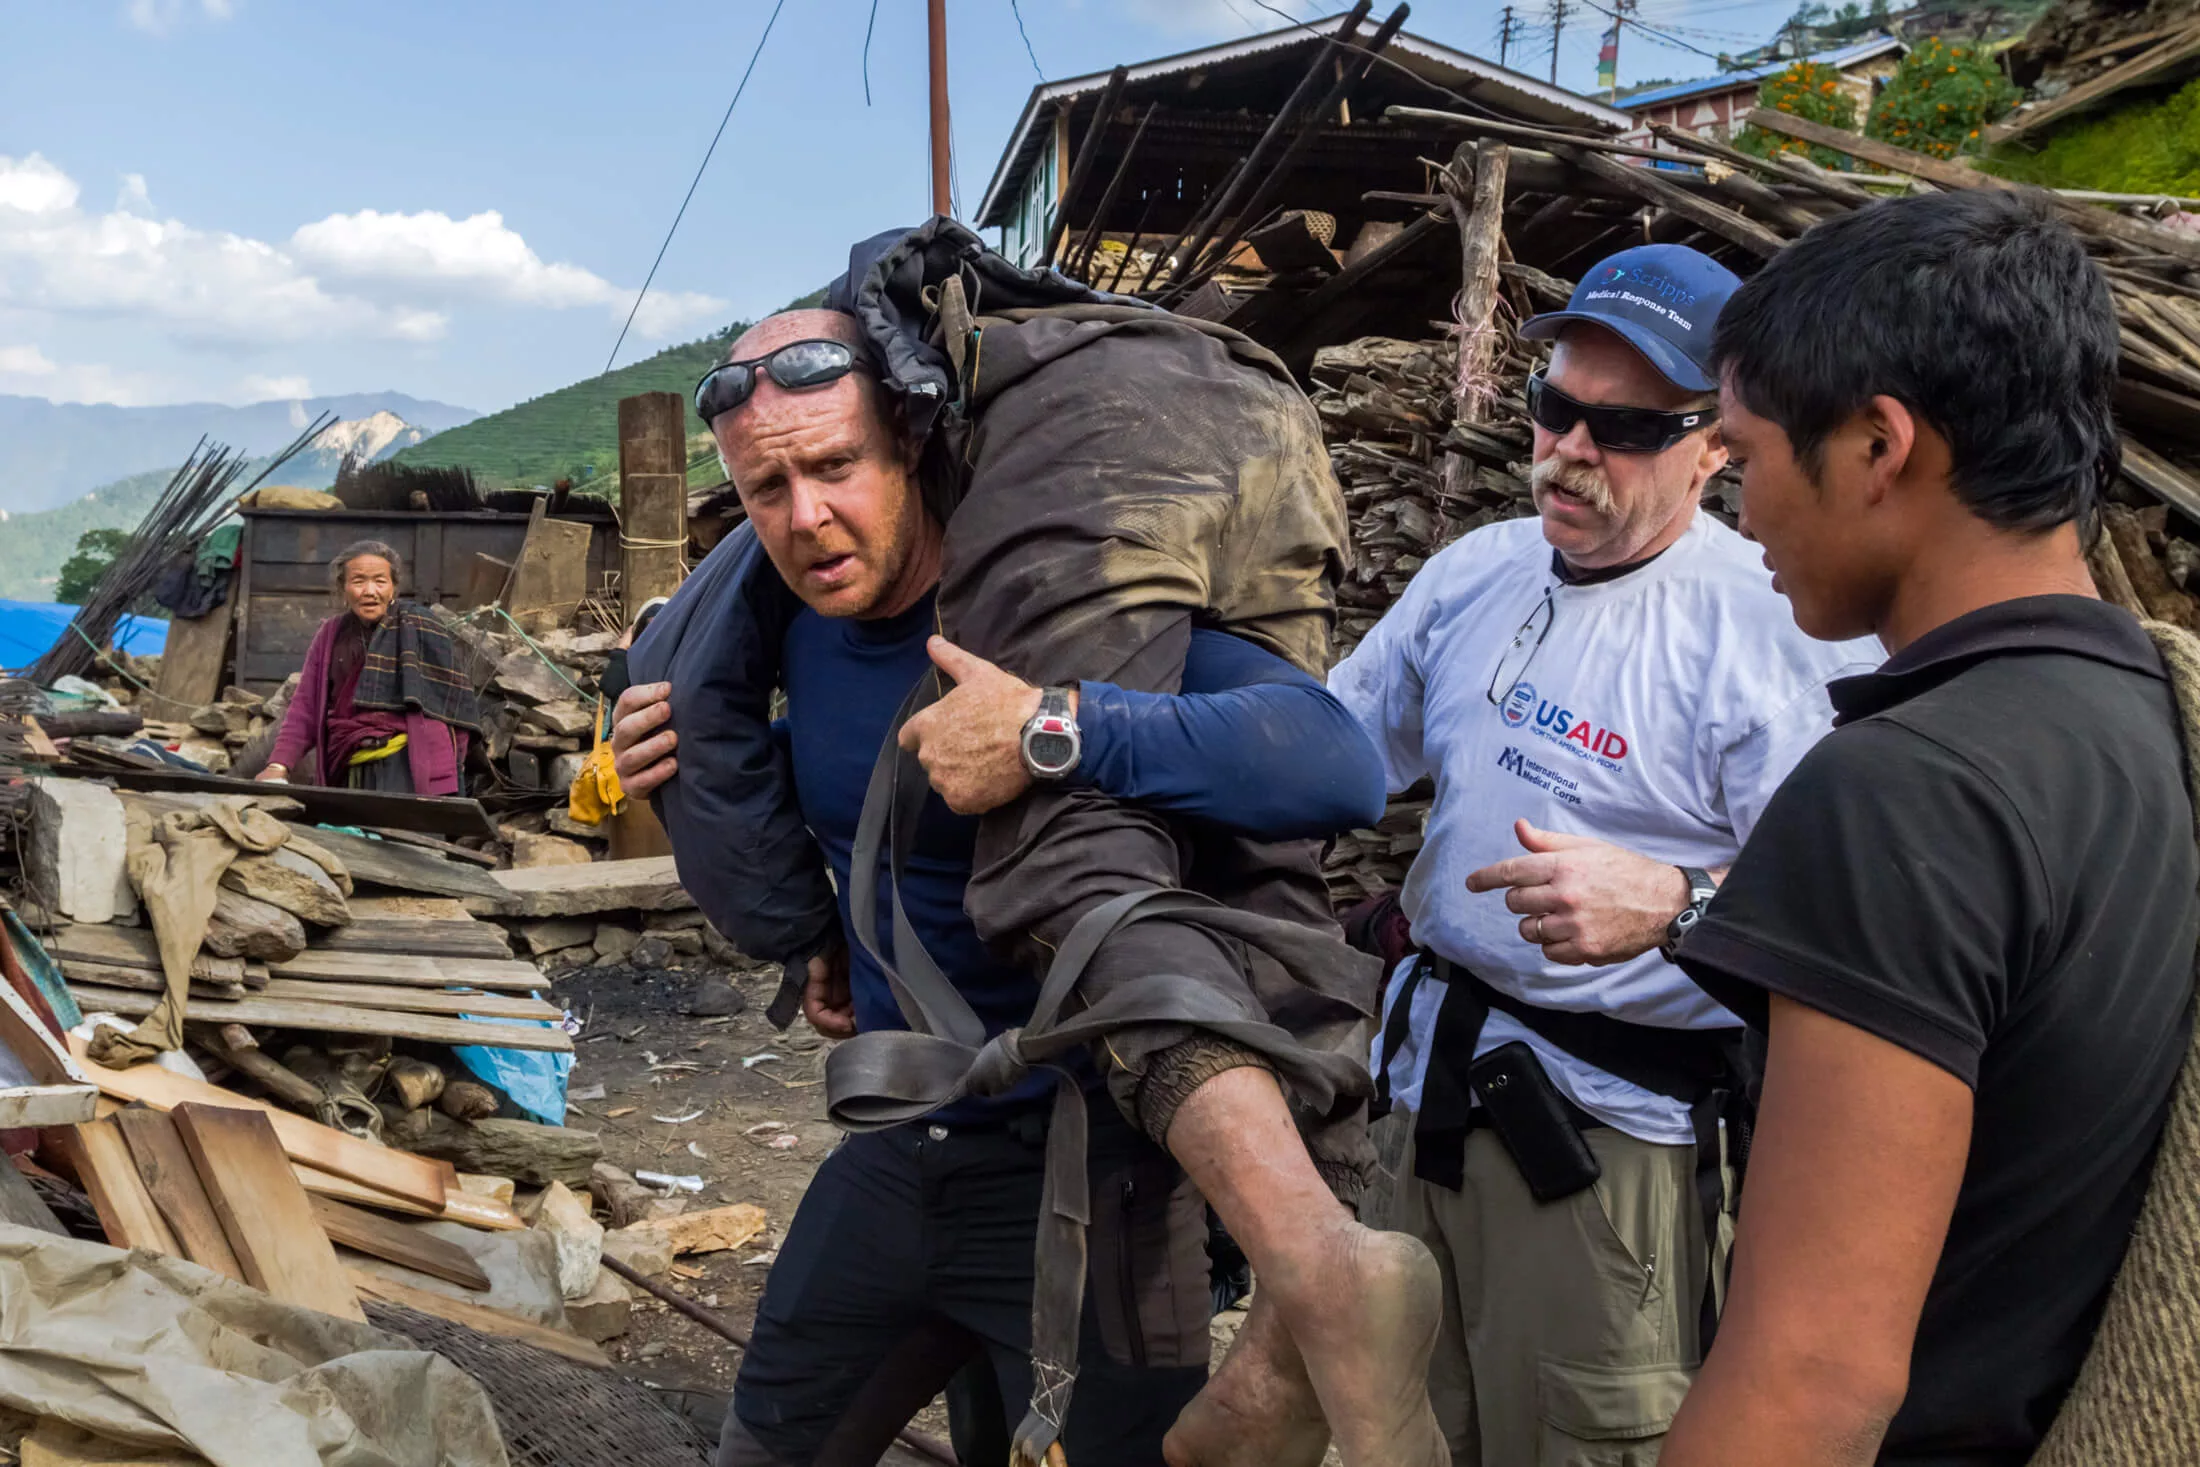 Dr. Michael Karch carries an injured man uphill during a rescue mission in Nepal in 2015 after the devastating earthquake there.